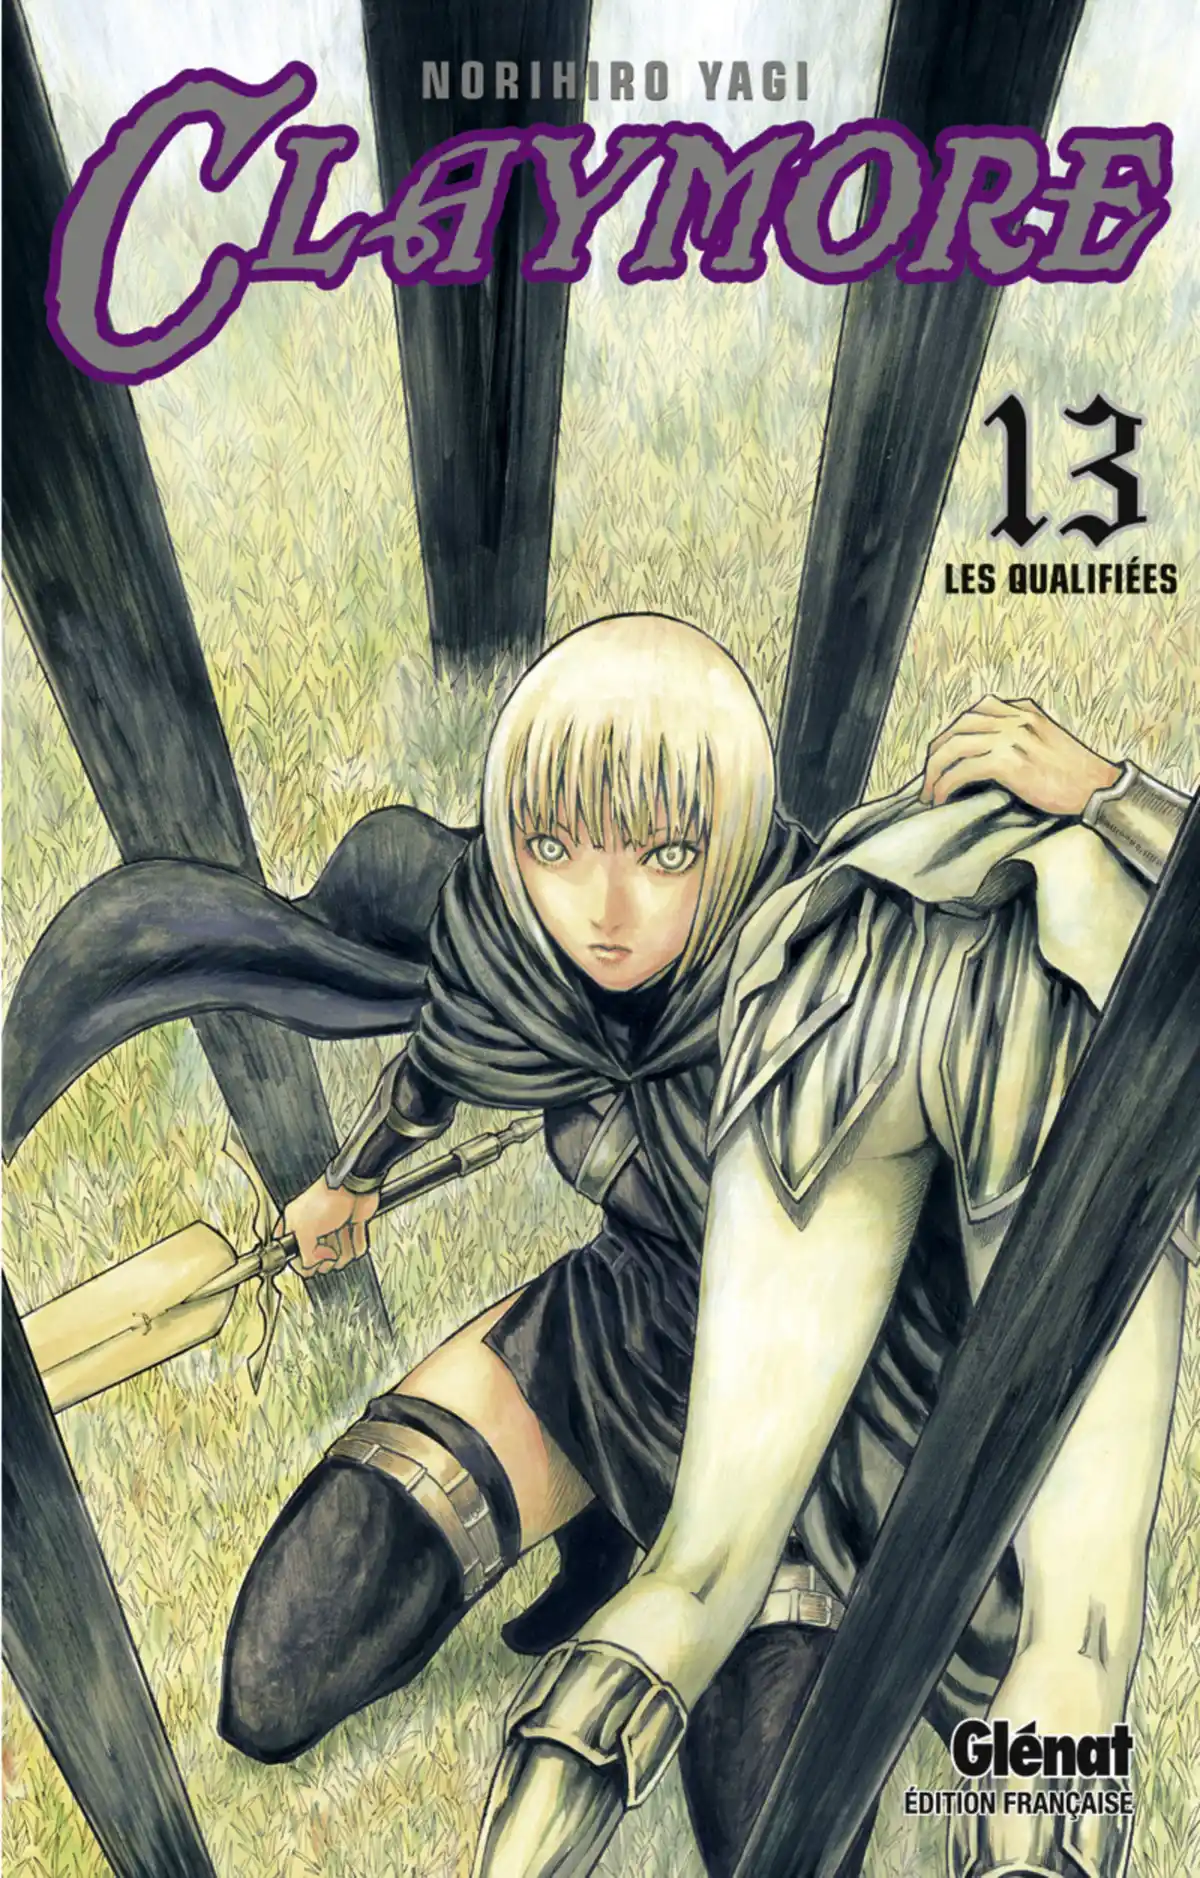 Claymore Volume 13 page 1